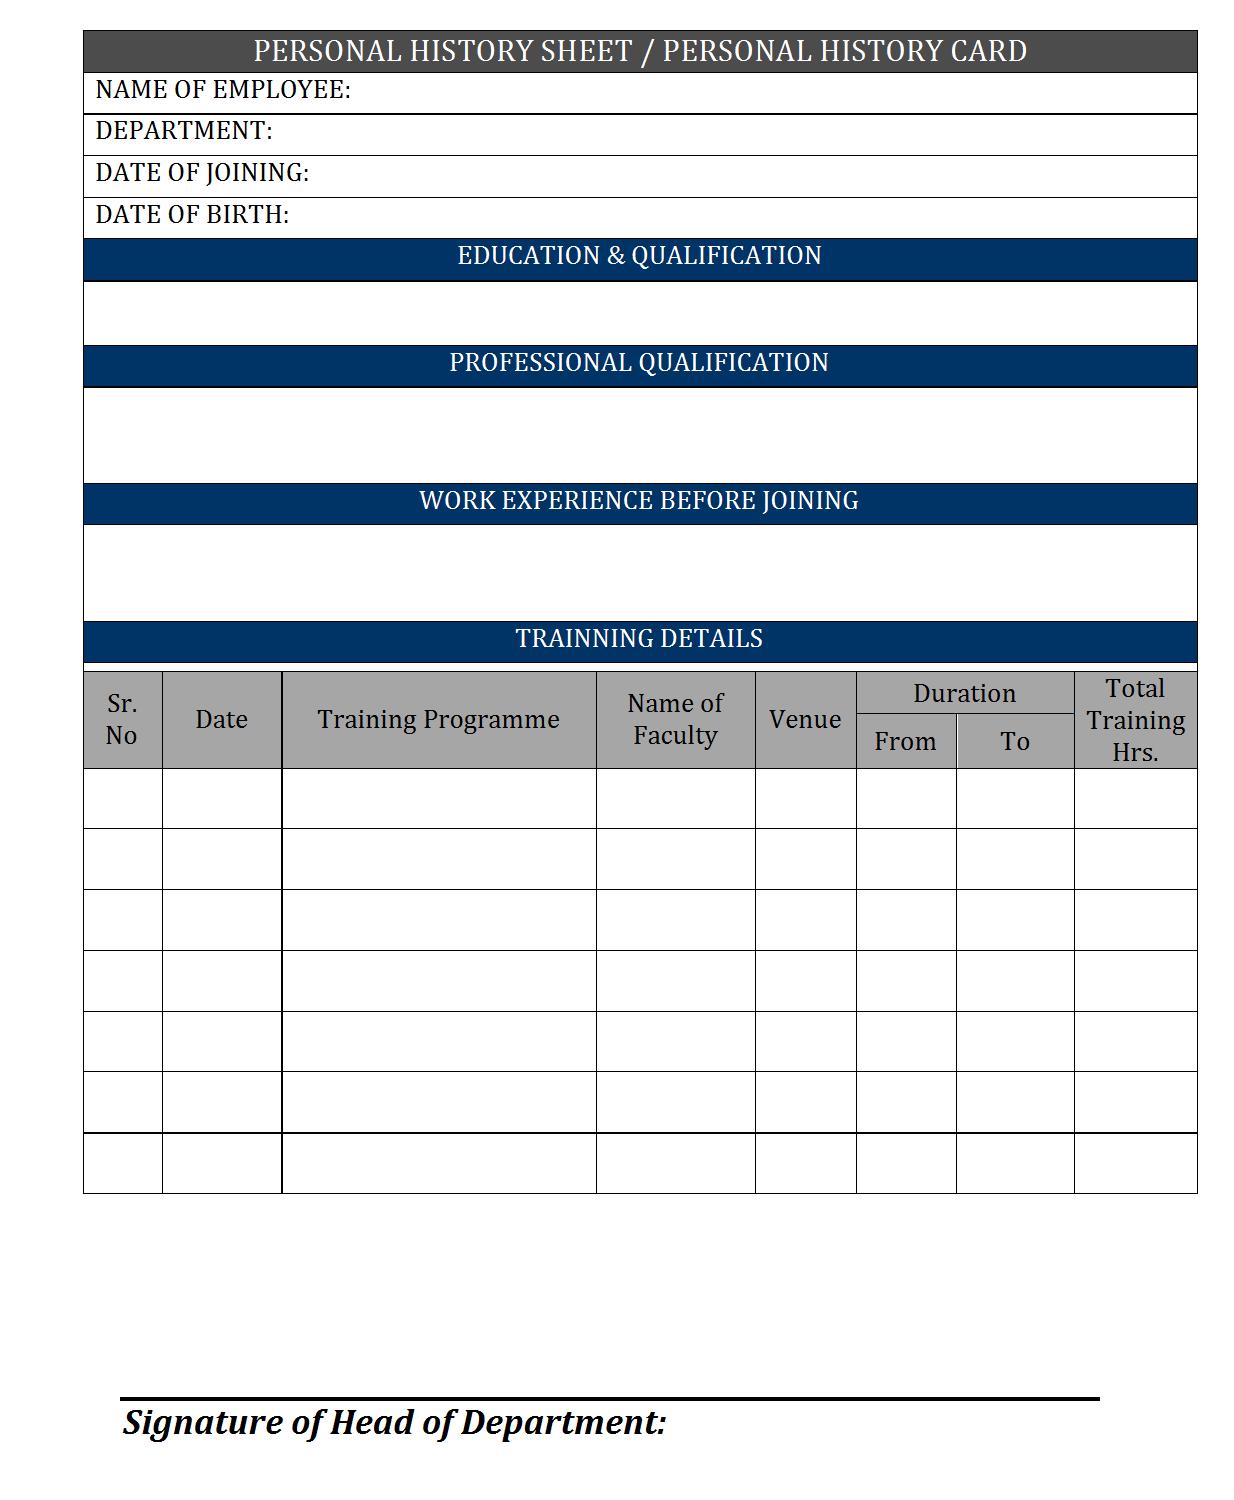 employee History Card format  Report  Samples  Word Document Inside Employee Card Template Word